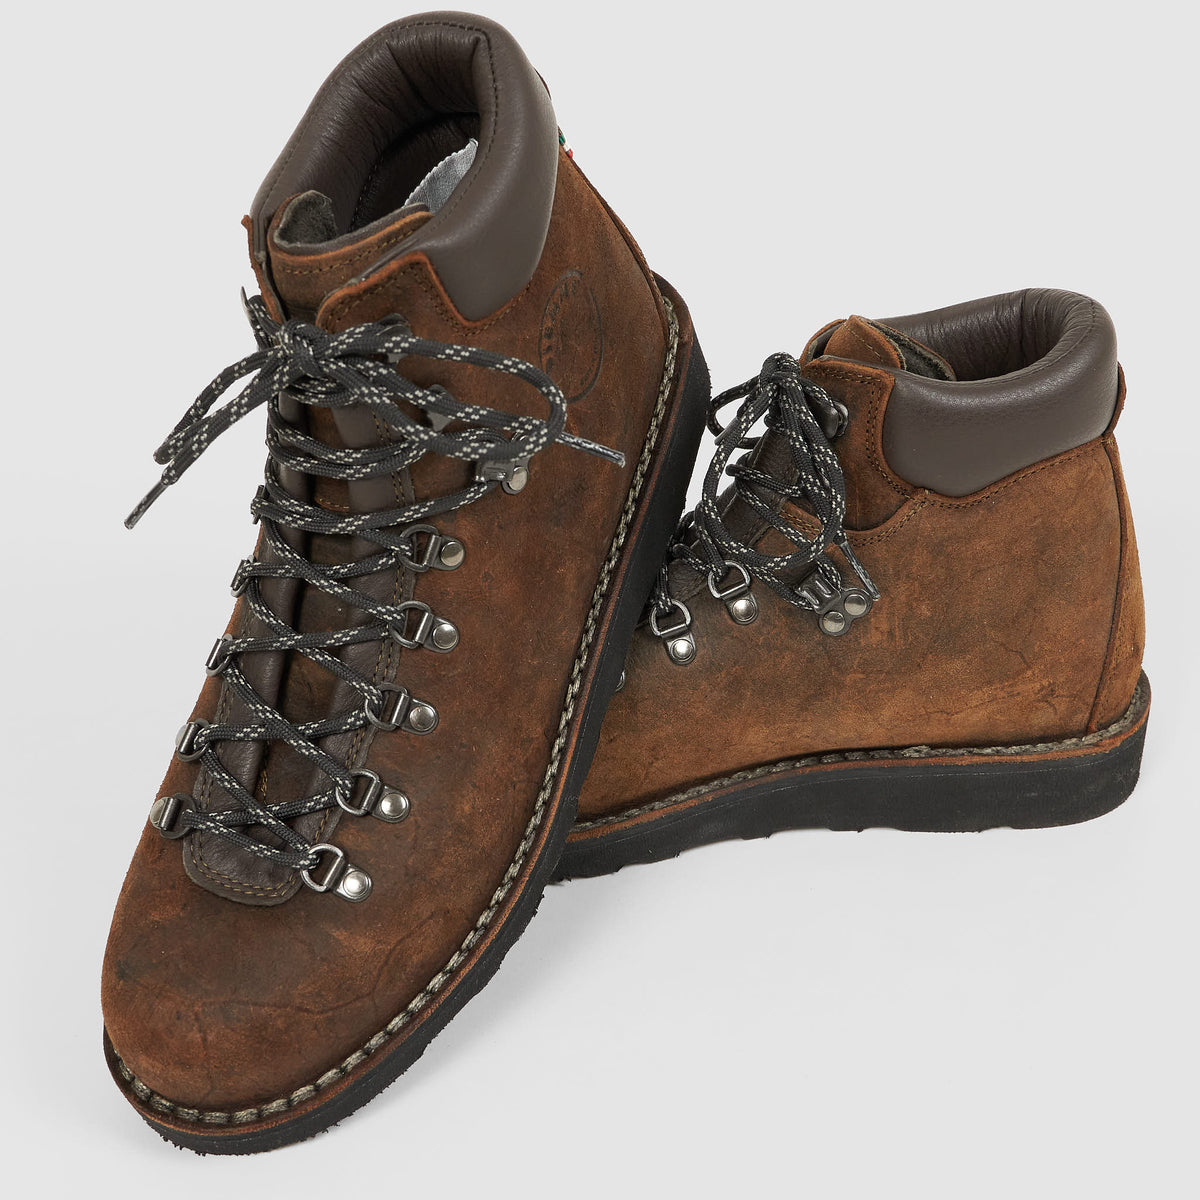 Diemme Vintage Waxed Leather Hiking Boot